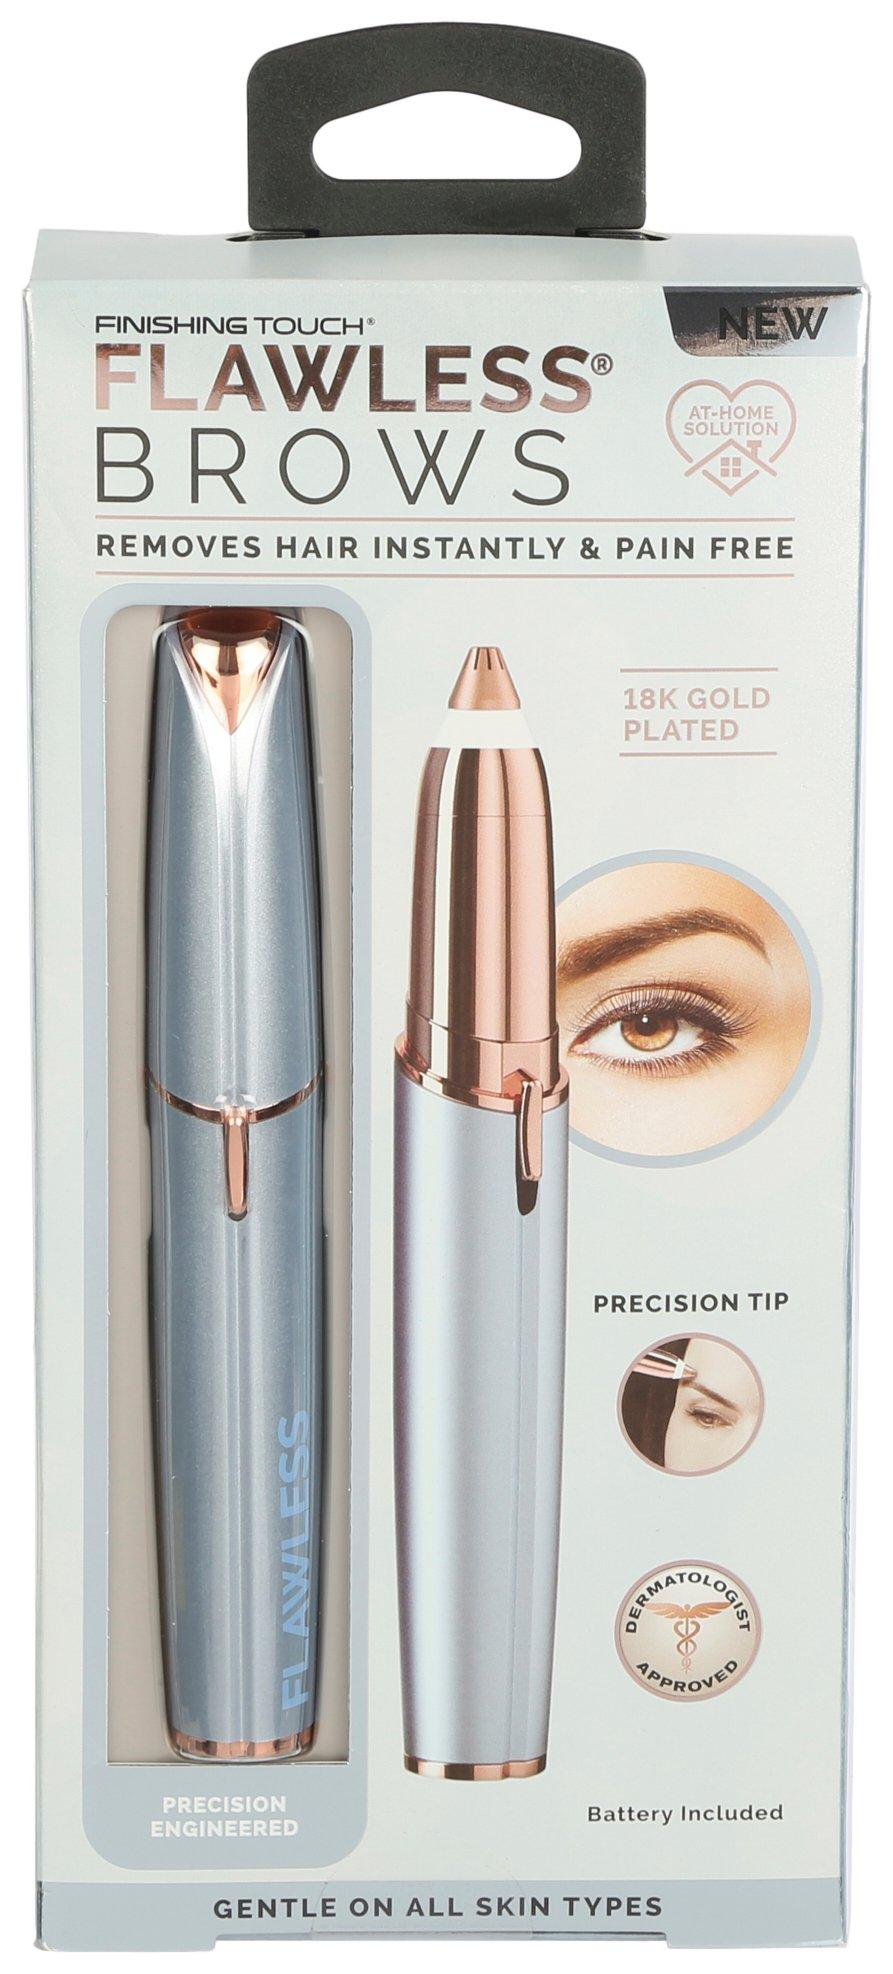 BrowS Hair Remover With Built-In Light